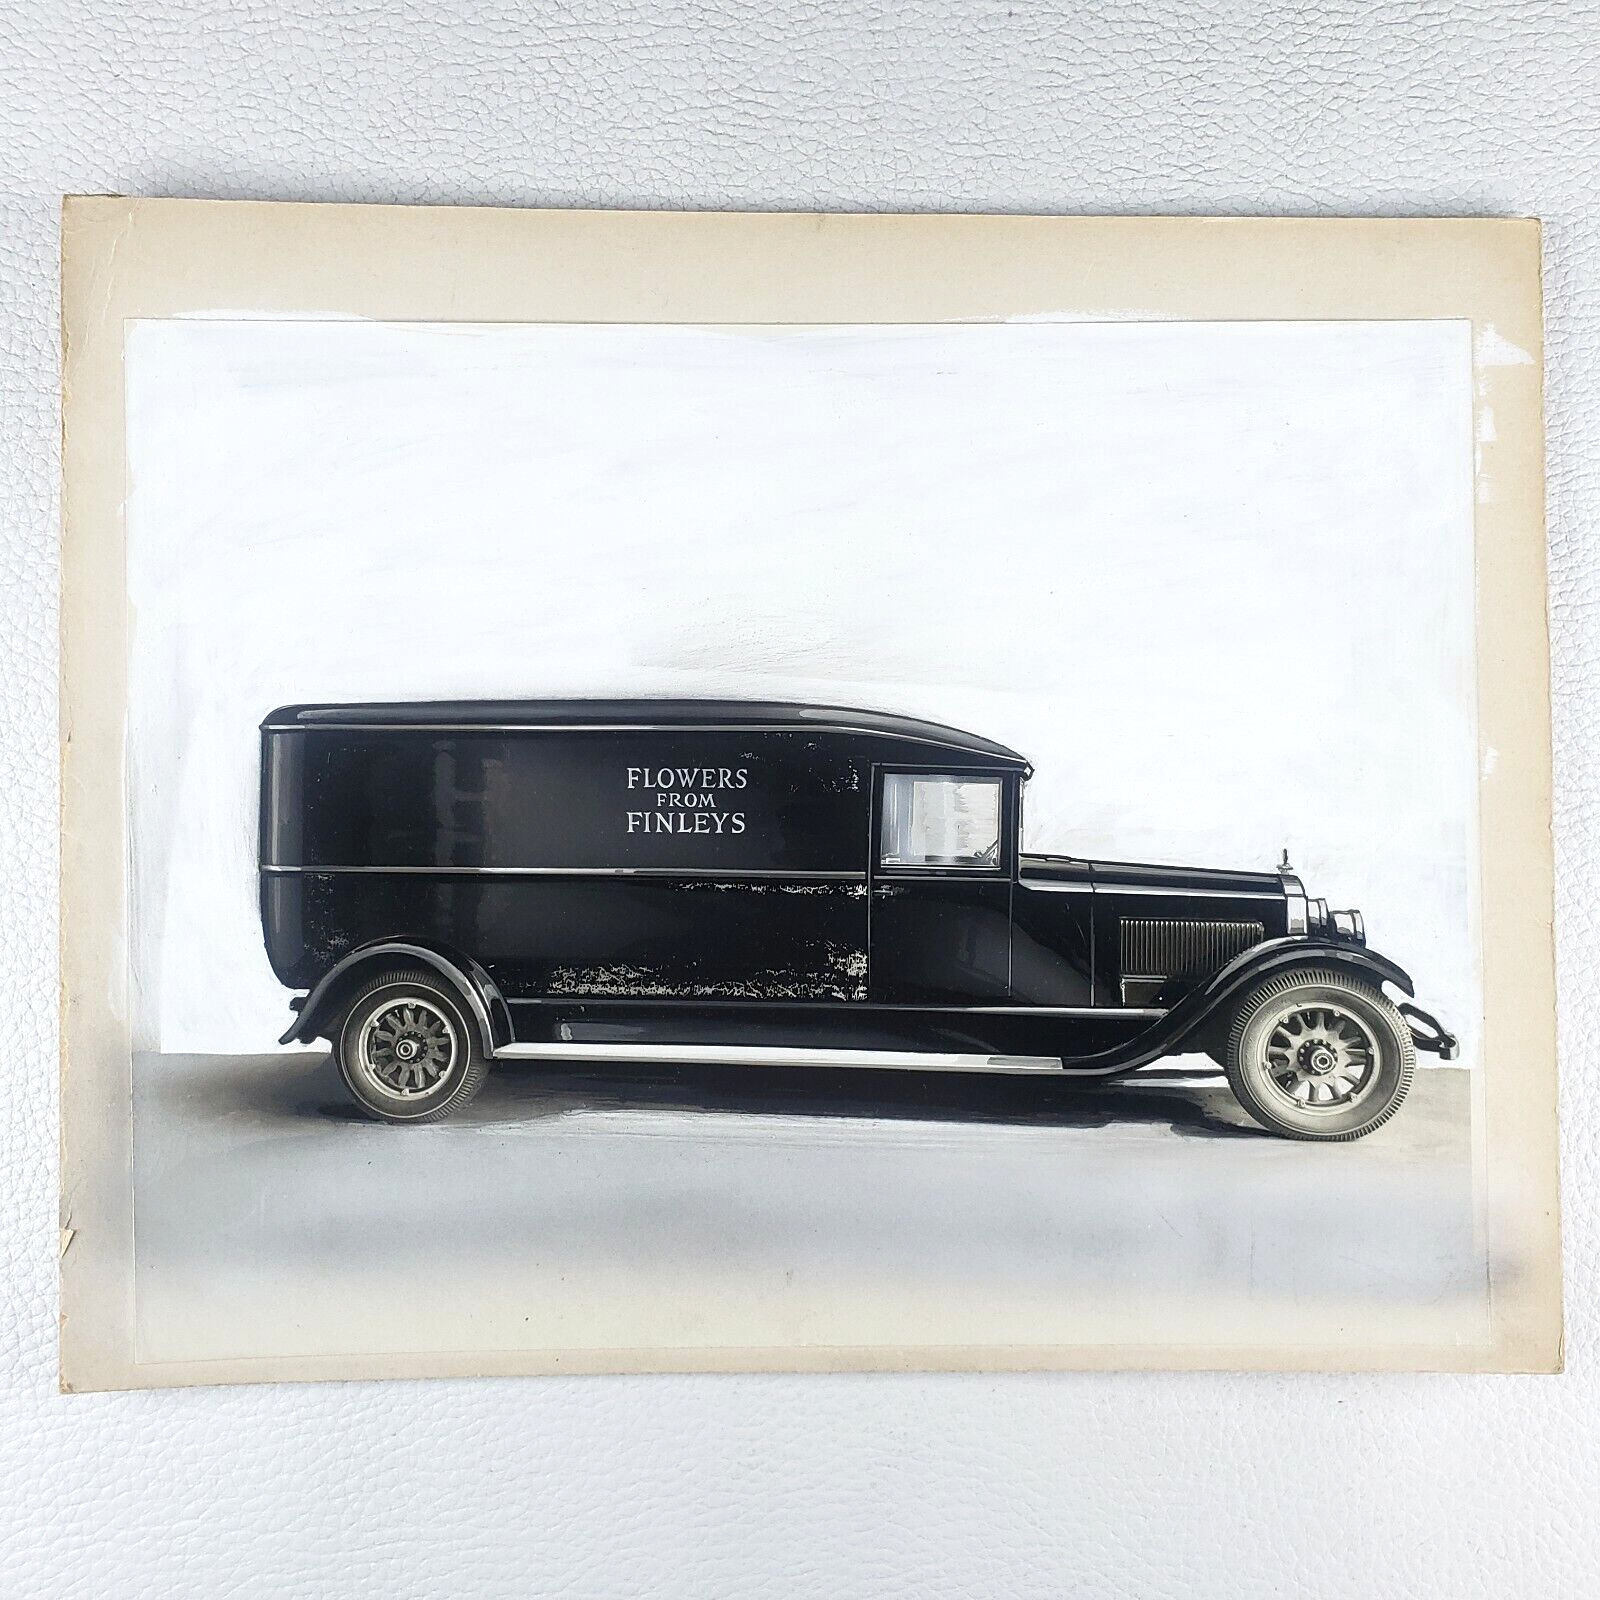 Packard Flower Delivery Truck Photo 1920s Funeral Home Shop Portland Oregon O114